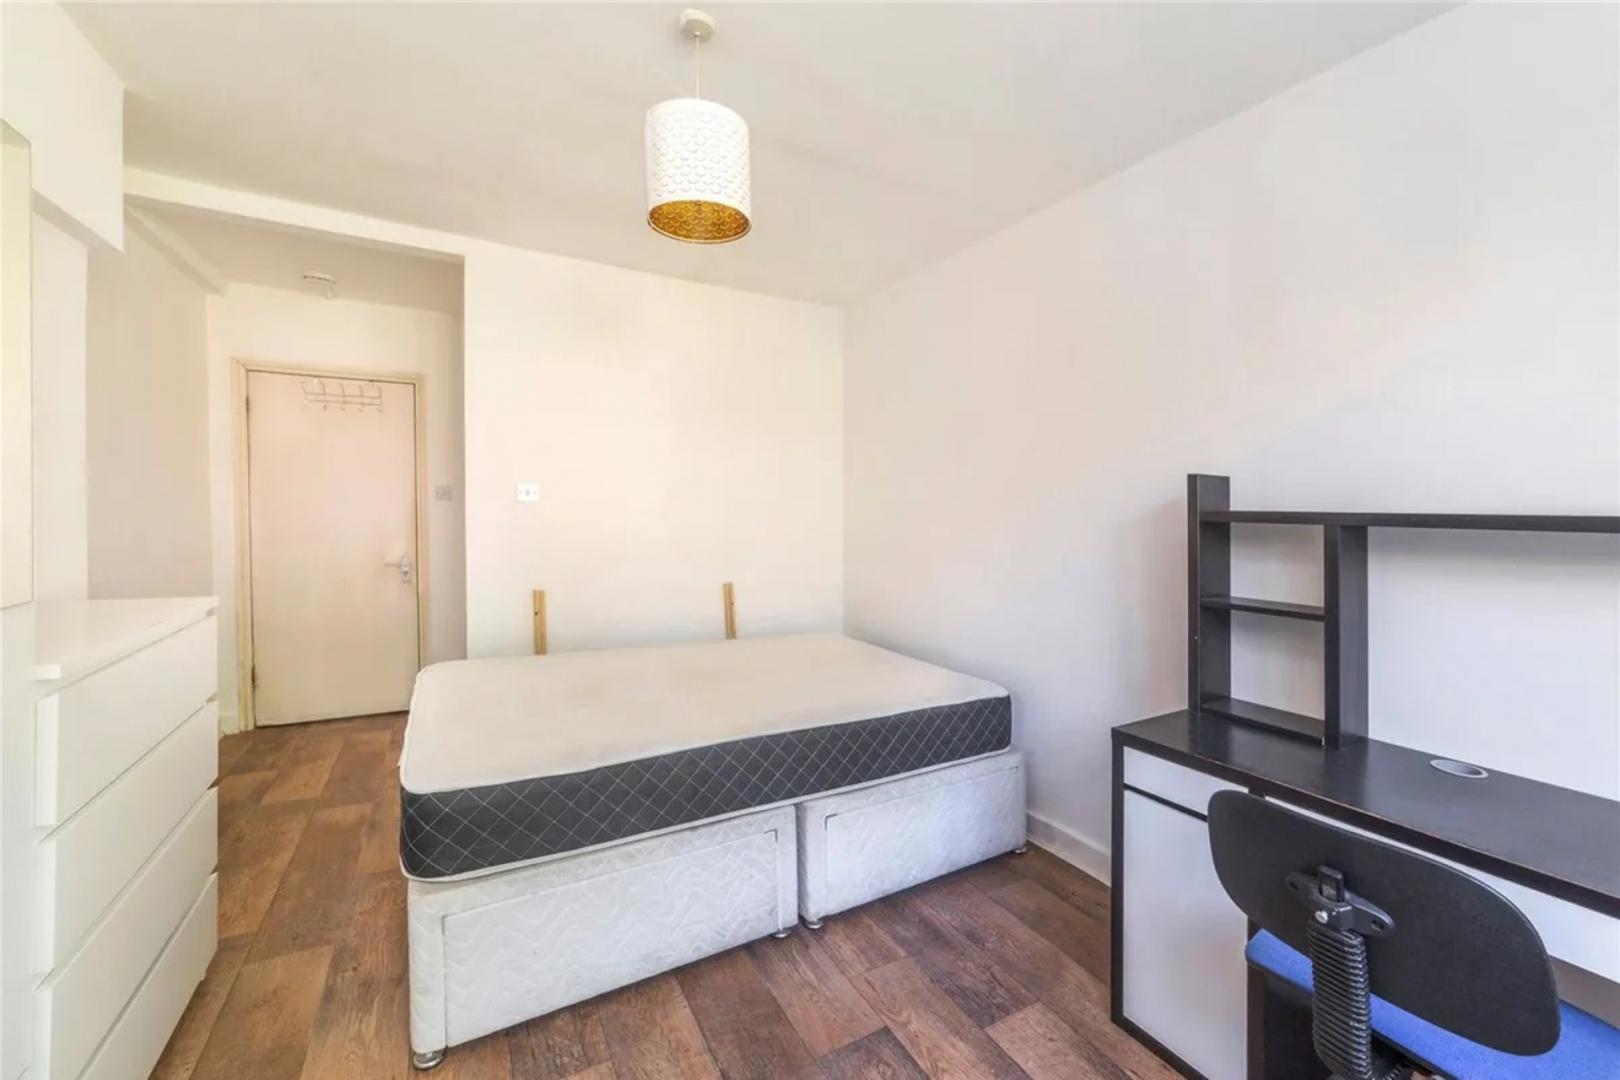 Spacious 3 bedroom garden property located near Archway tube station Fairbridge Road, Archway